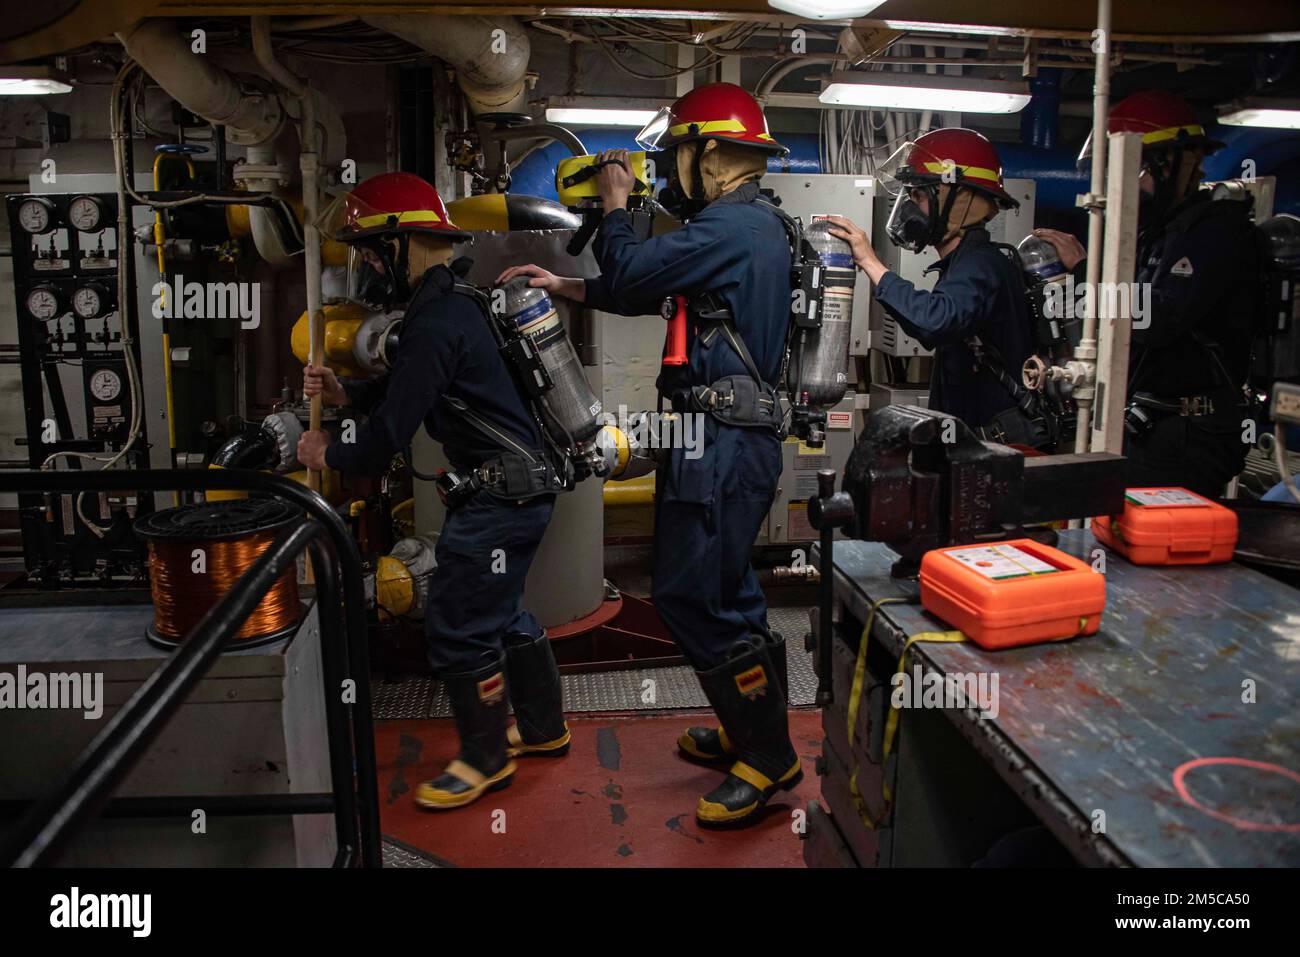 220228-N-XB010-1002 EAST CHINA SEA (Feb. 28, 2022) Sailors assigned to USS New Orleans (LPD 18) overhaul a space during a damage control training team evolution. New Orleans, part of the America Amphibious Ready Group, along with the 31st Marine Expeditionary Unit, is operating in the U.S. 7th Fleet area of responsibility to enhance interoperability with allies and partners and serve as a ready response force to defend peace and stability in the Indo-Pacific region. Stock Photo